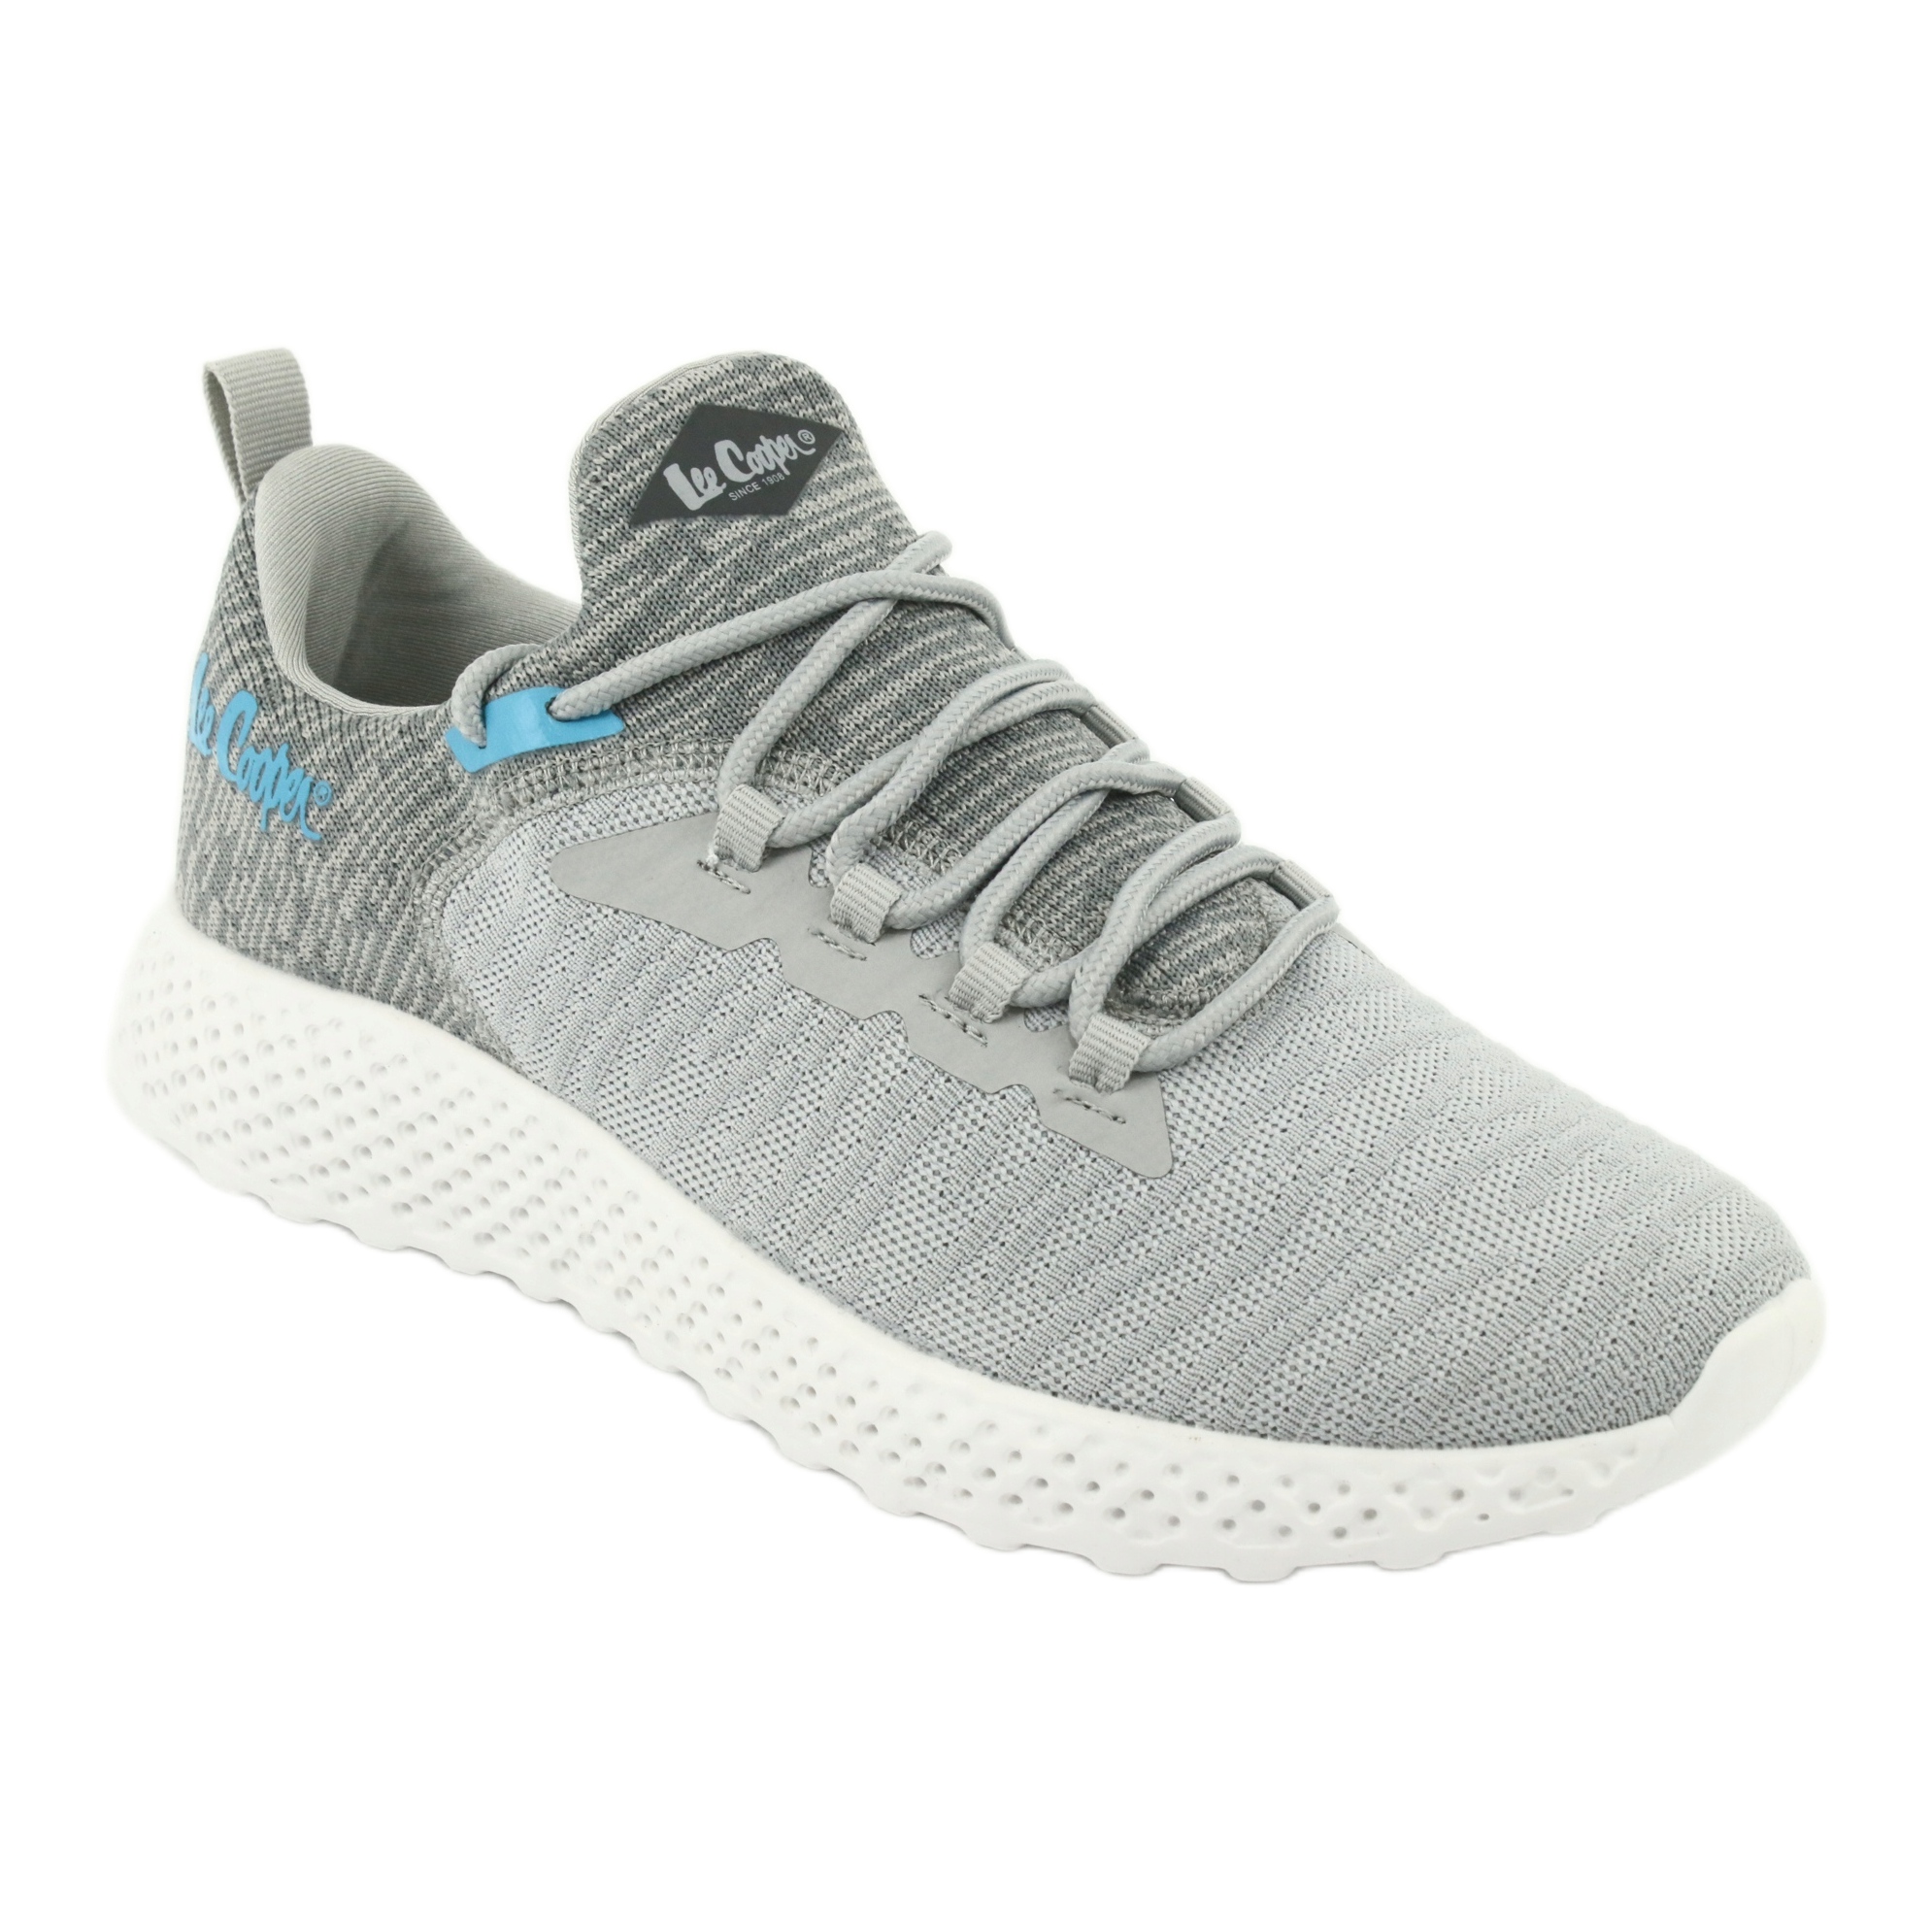 lee cooper sports lcw 20 32 012 gray blue grey 1